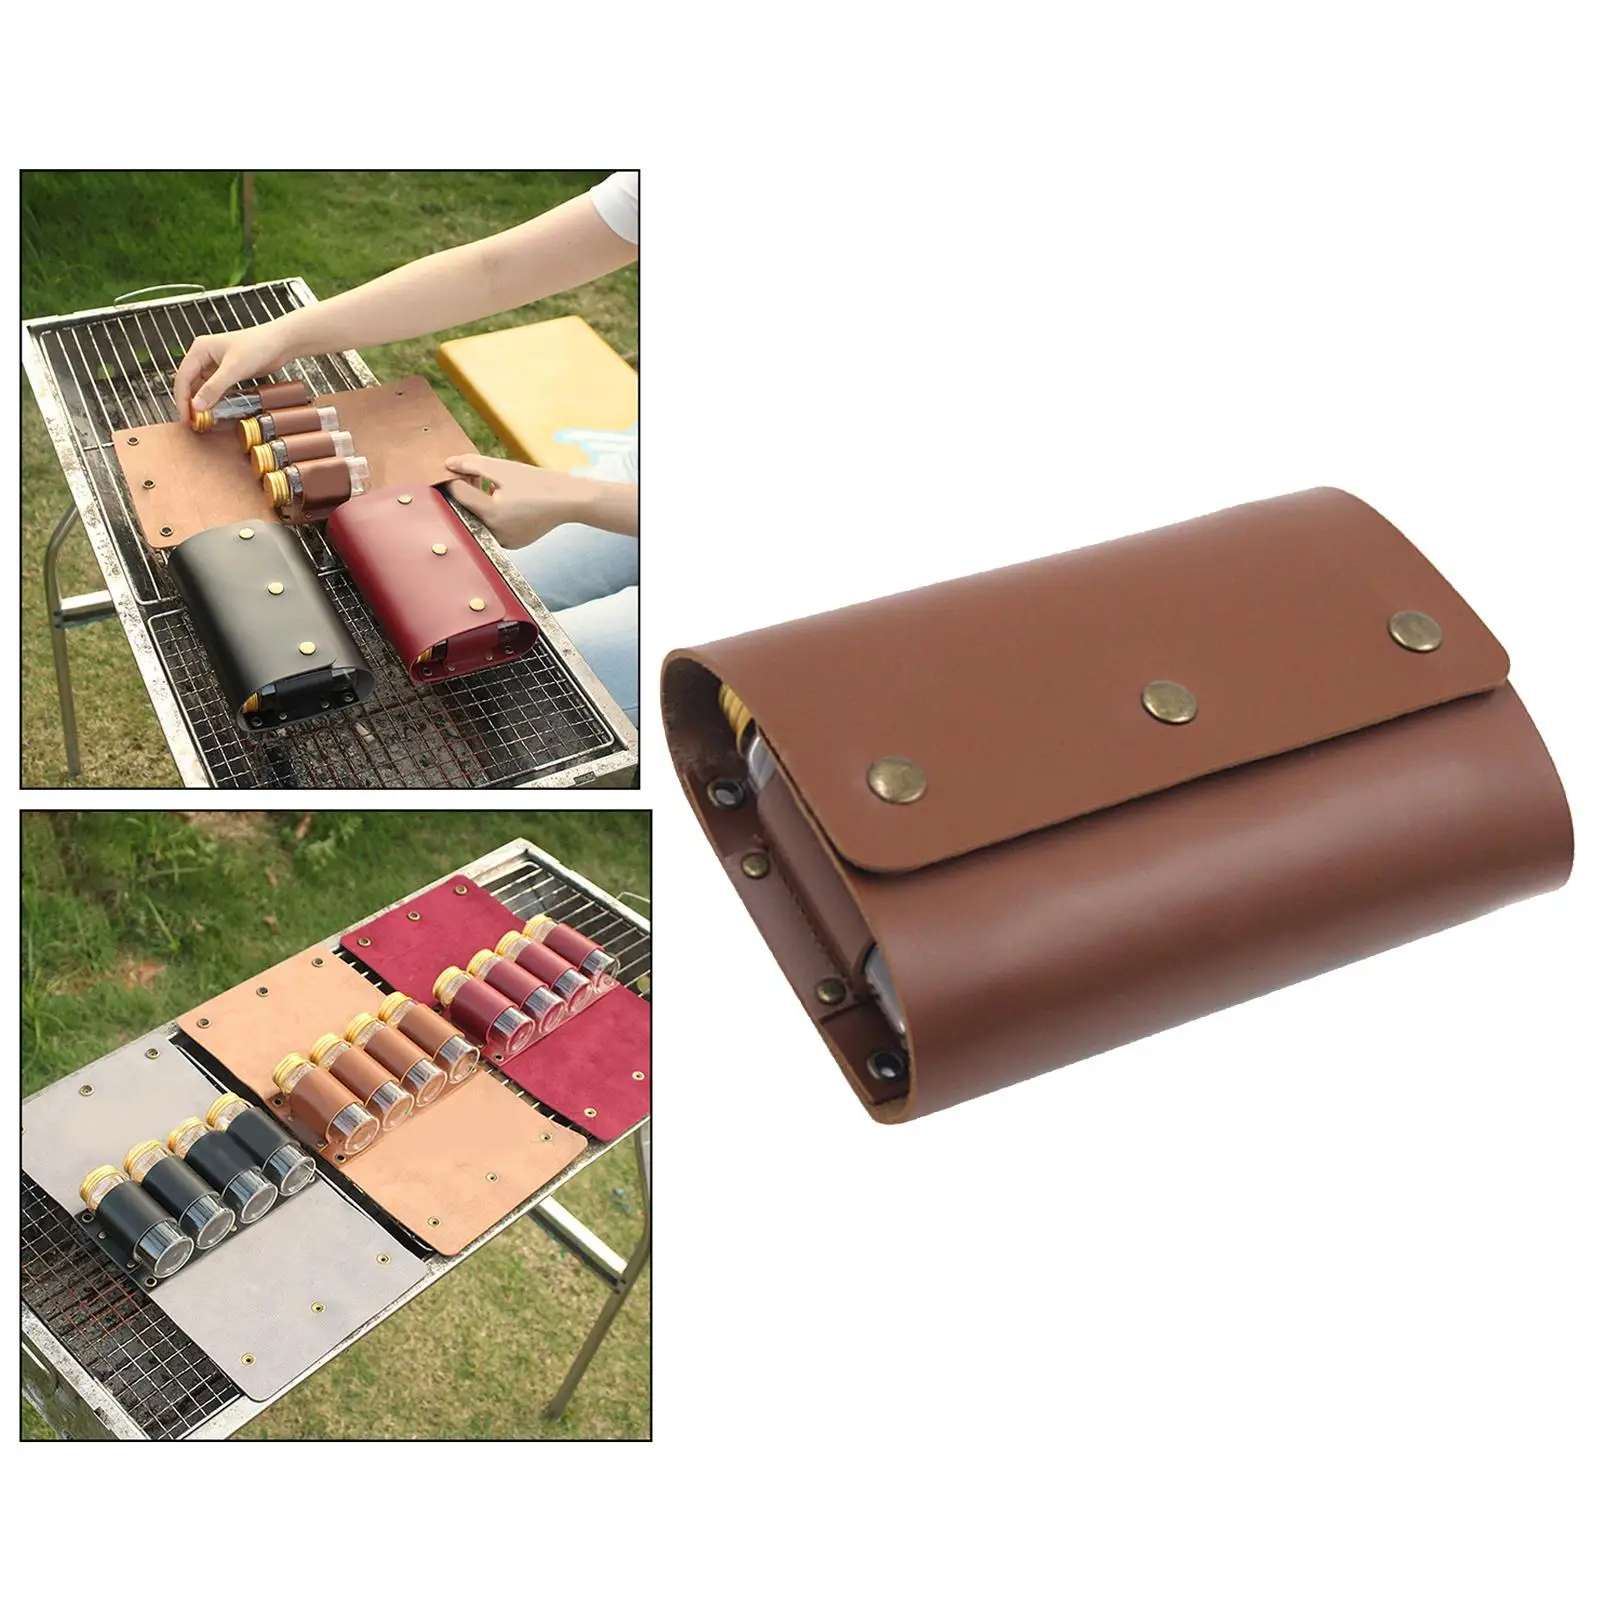 PU Leather Outdoor Seasoning Storage Bag Organizer with 4 Spice Jars for Traveling Barbecue Container Lightweight Family Use